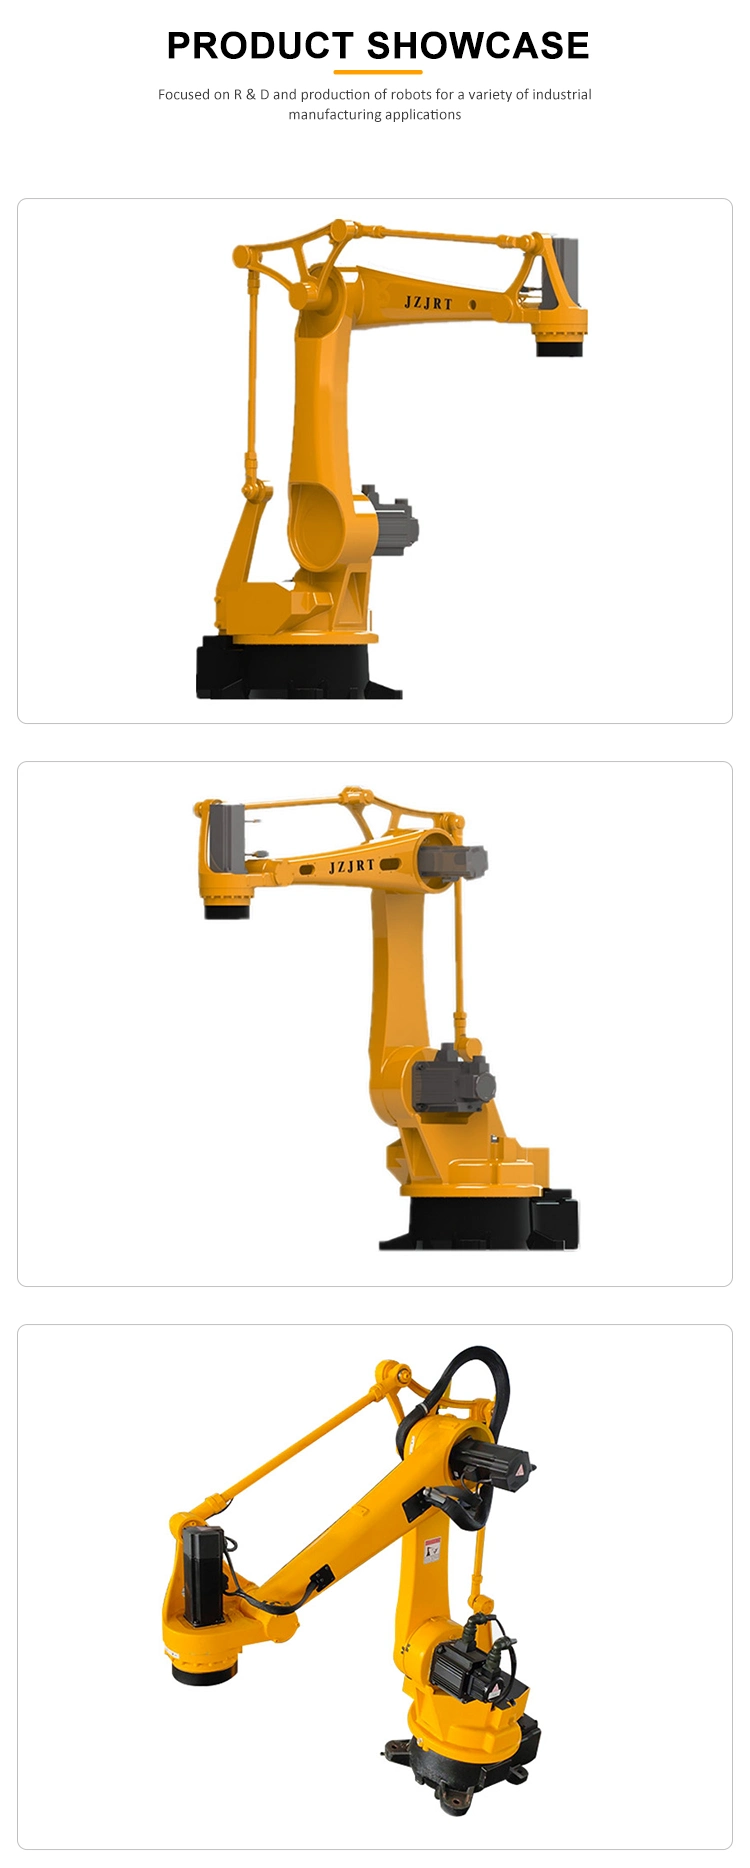 Hot Selling 6 Dof Articulated Robot with Gripper for Insert and Take out From Injection Machine